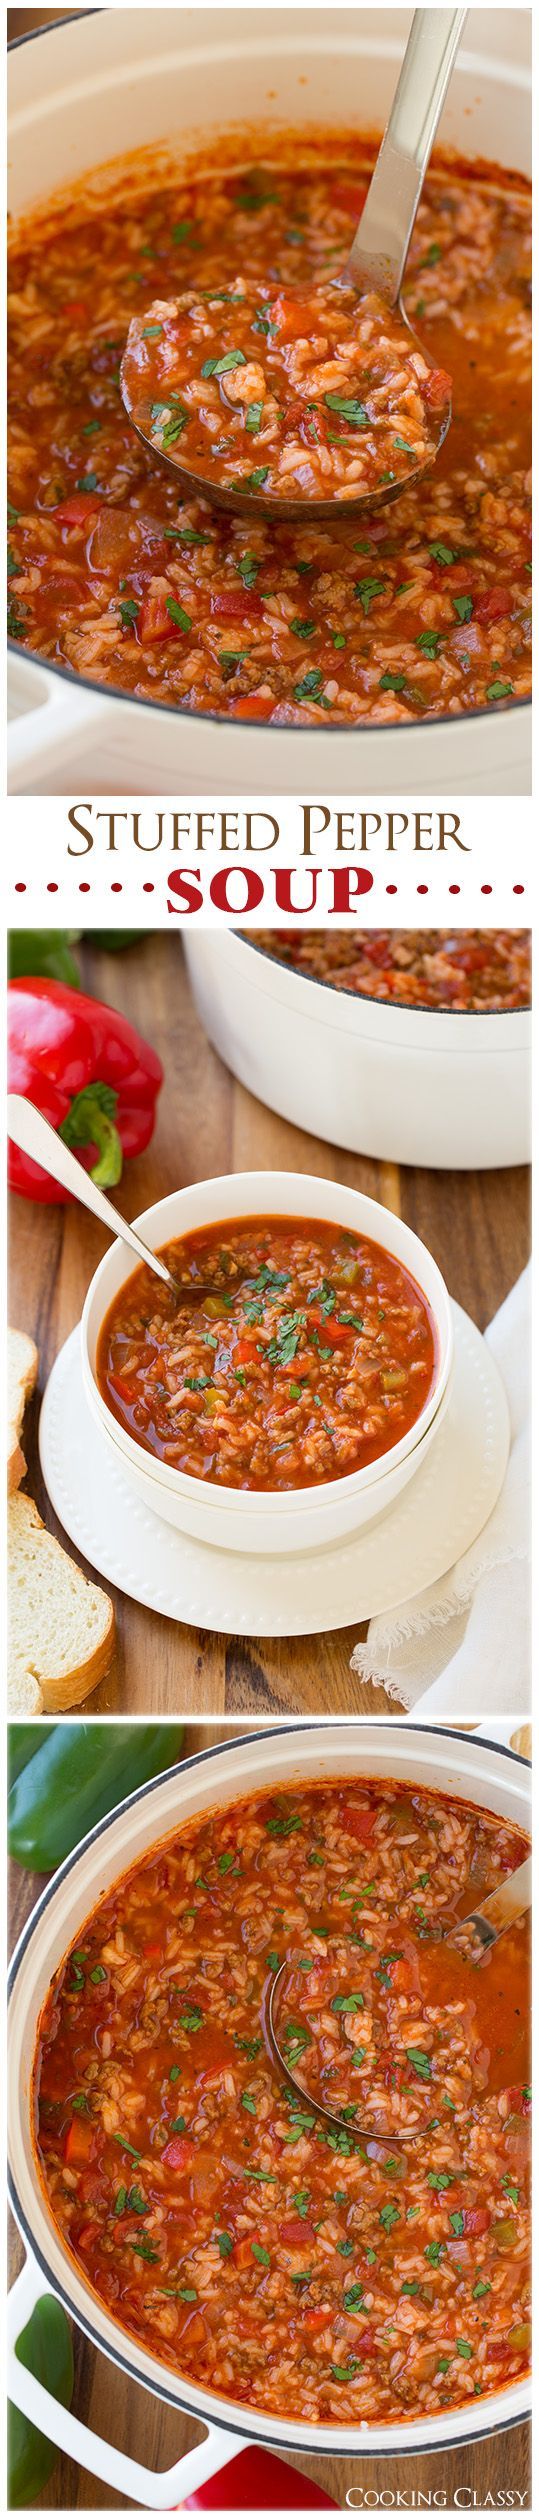 Stuffed Pepper Soup – youll like this even more than the real thing! Seriously S